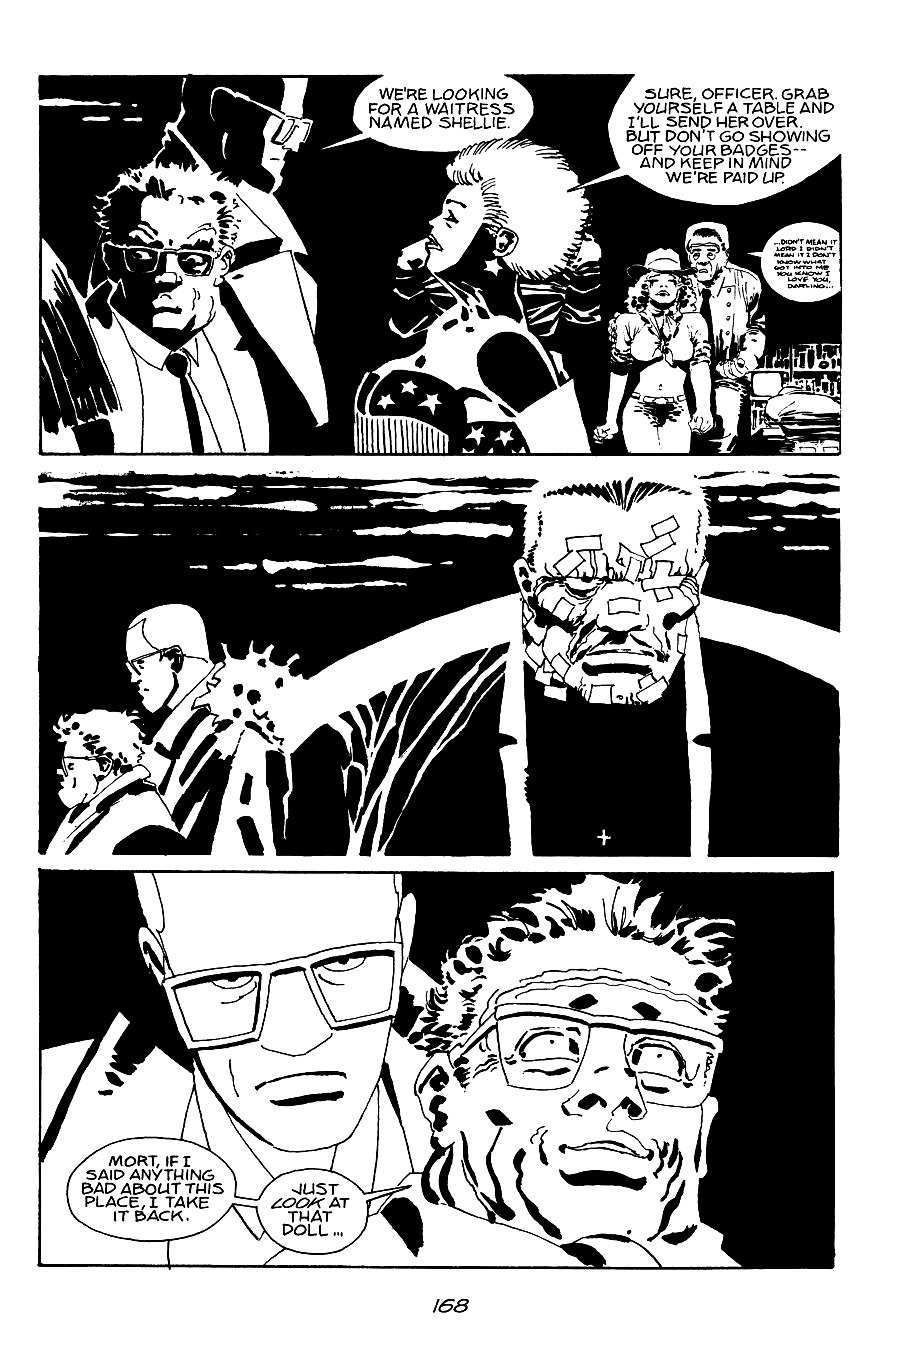 page 168 of sin city 2 the hard goodbye